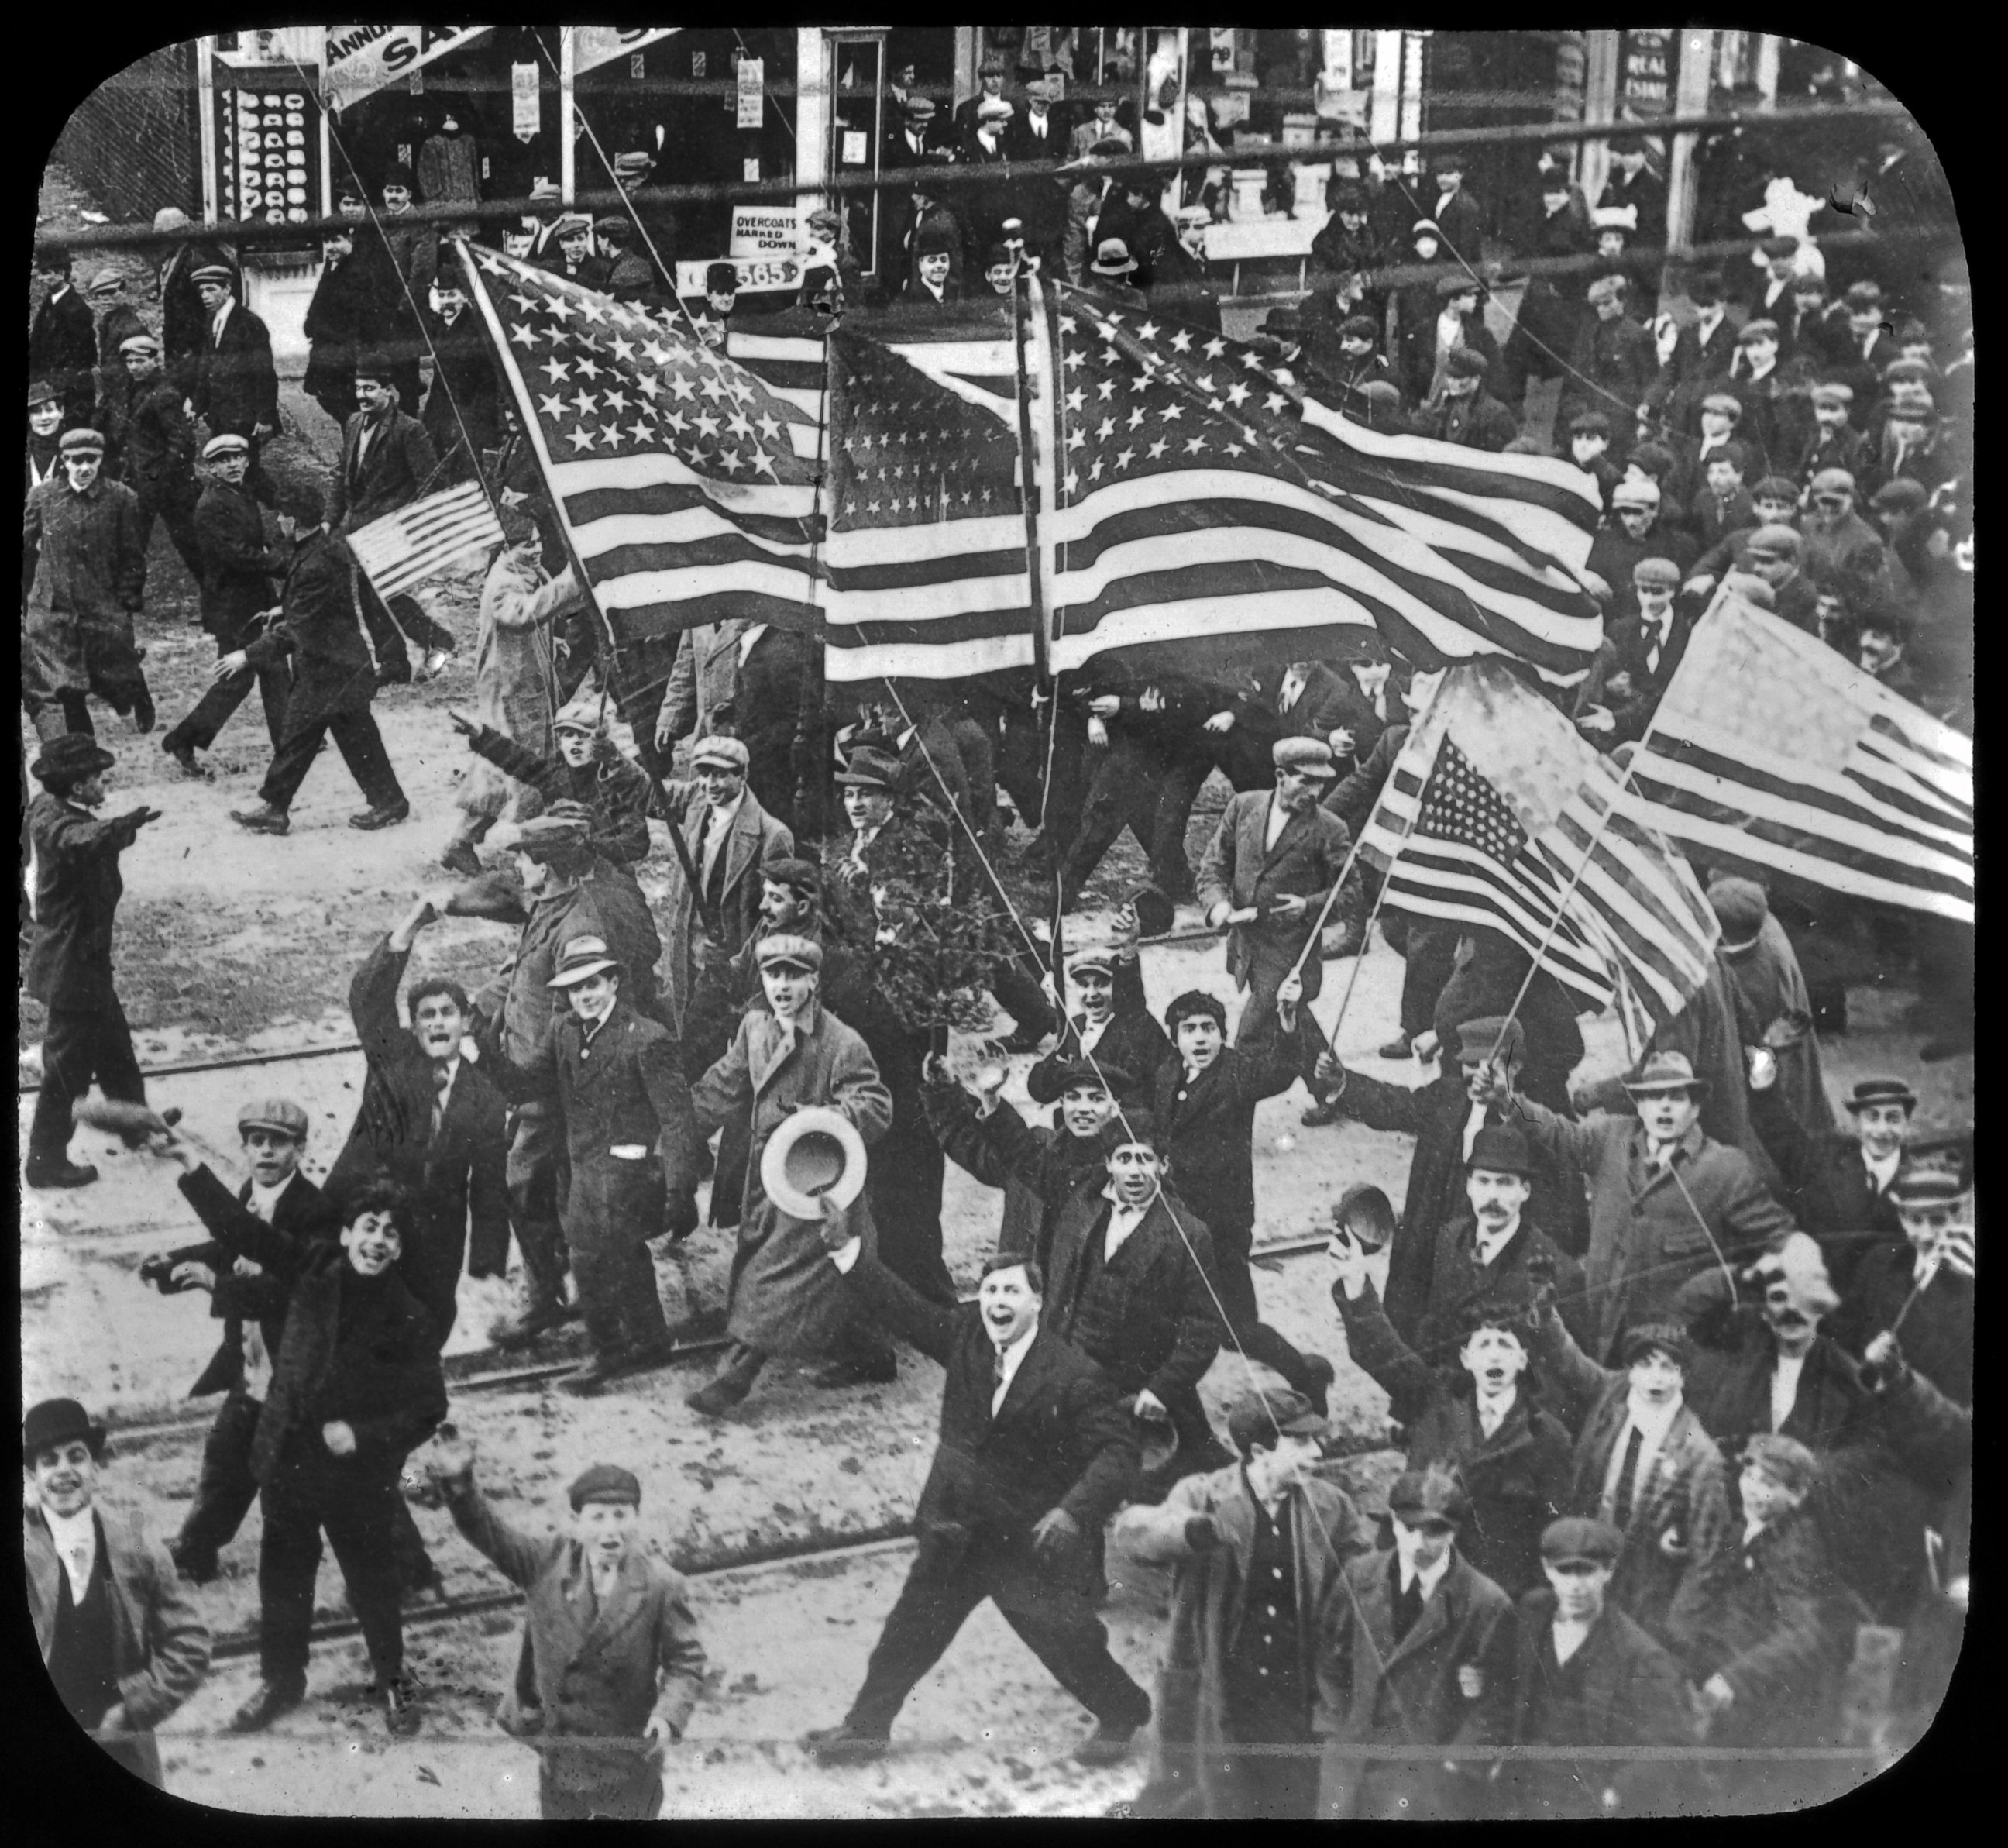 PHOTO: Parade through the streets upon the strikers' victory, 1912, Lawrence, Mass.